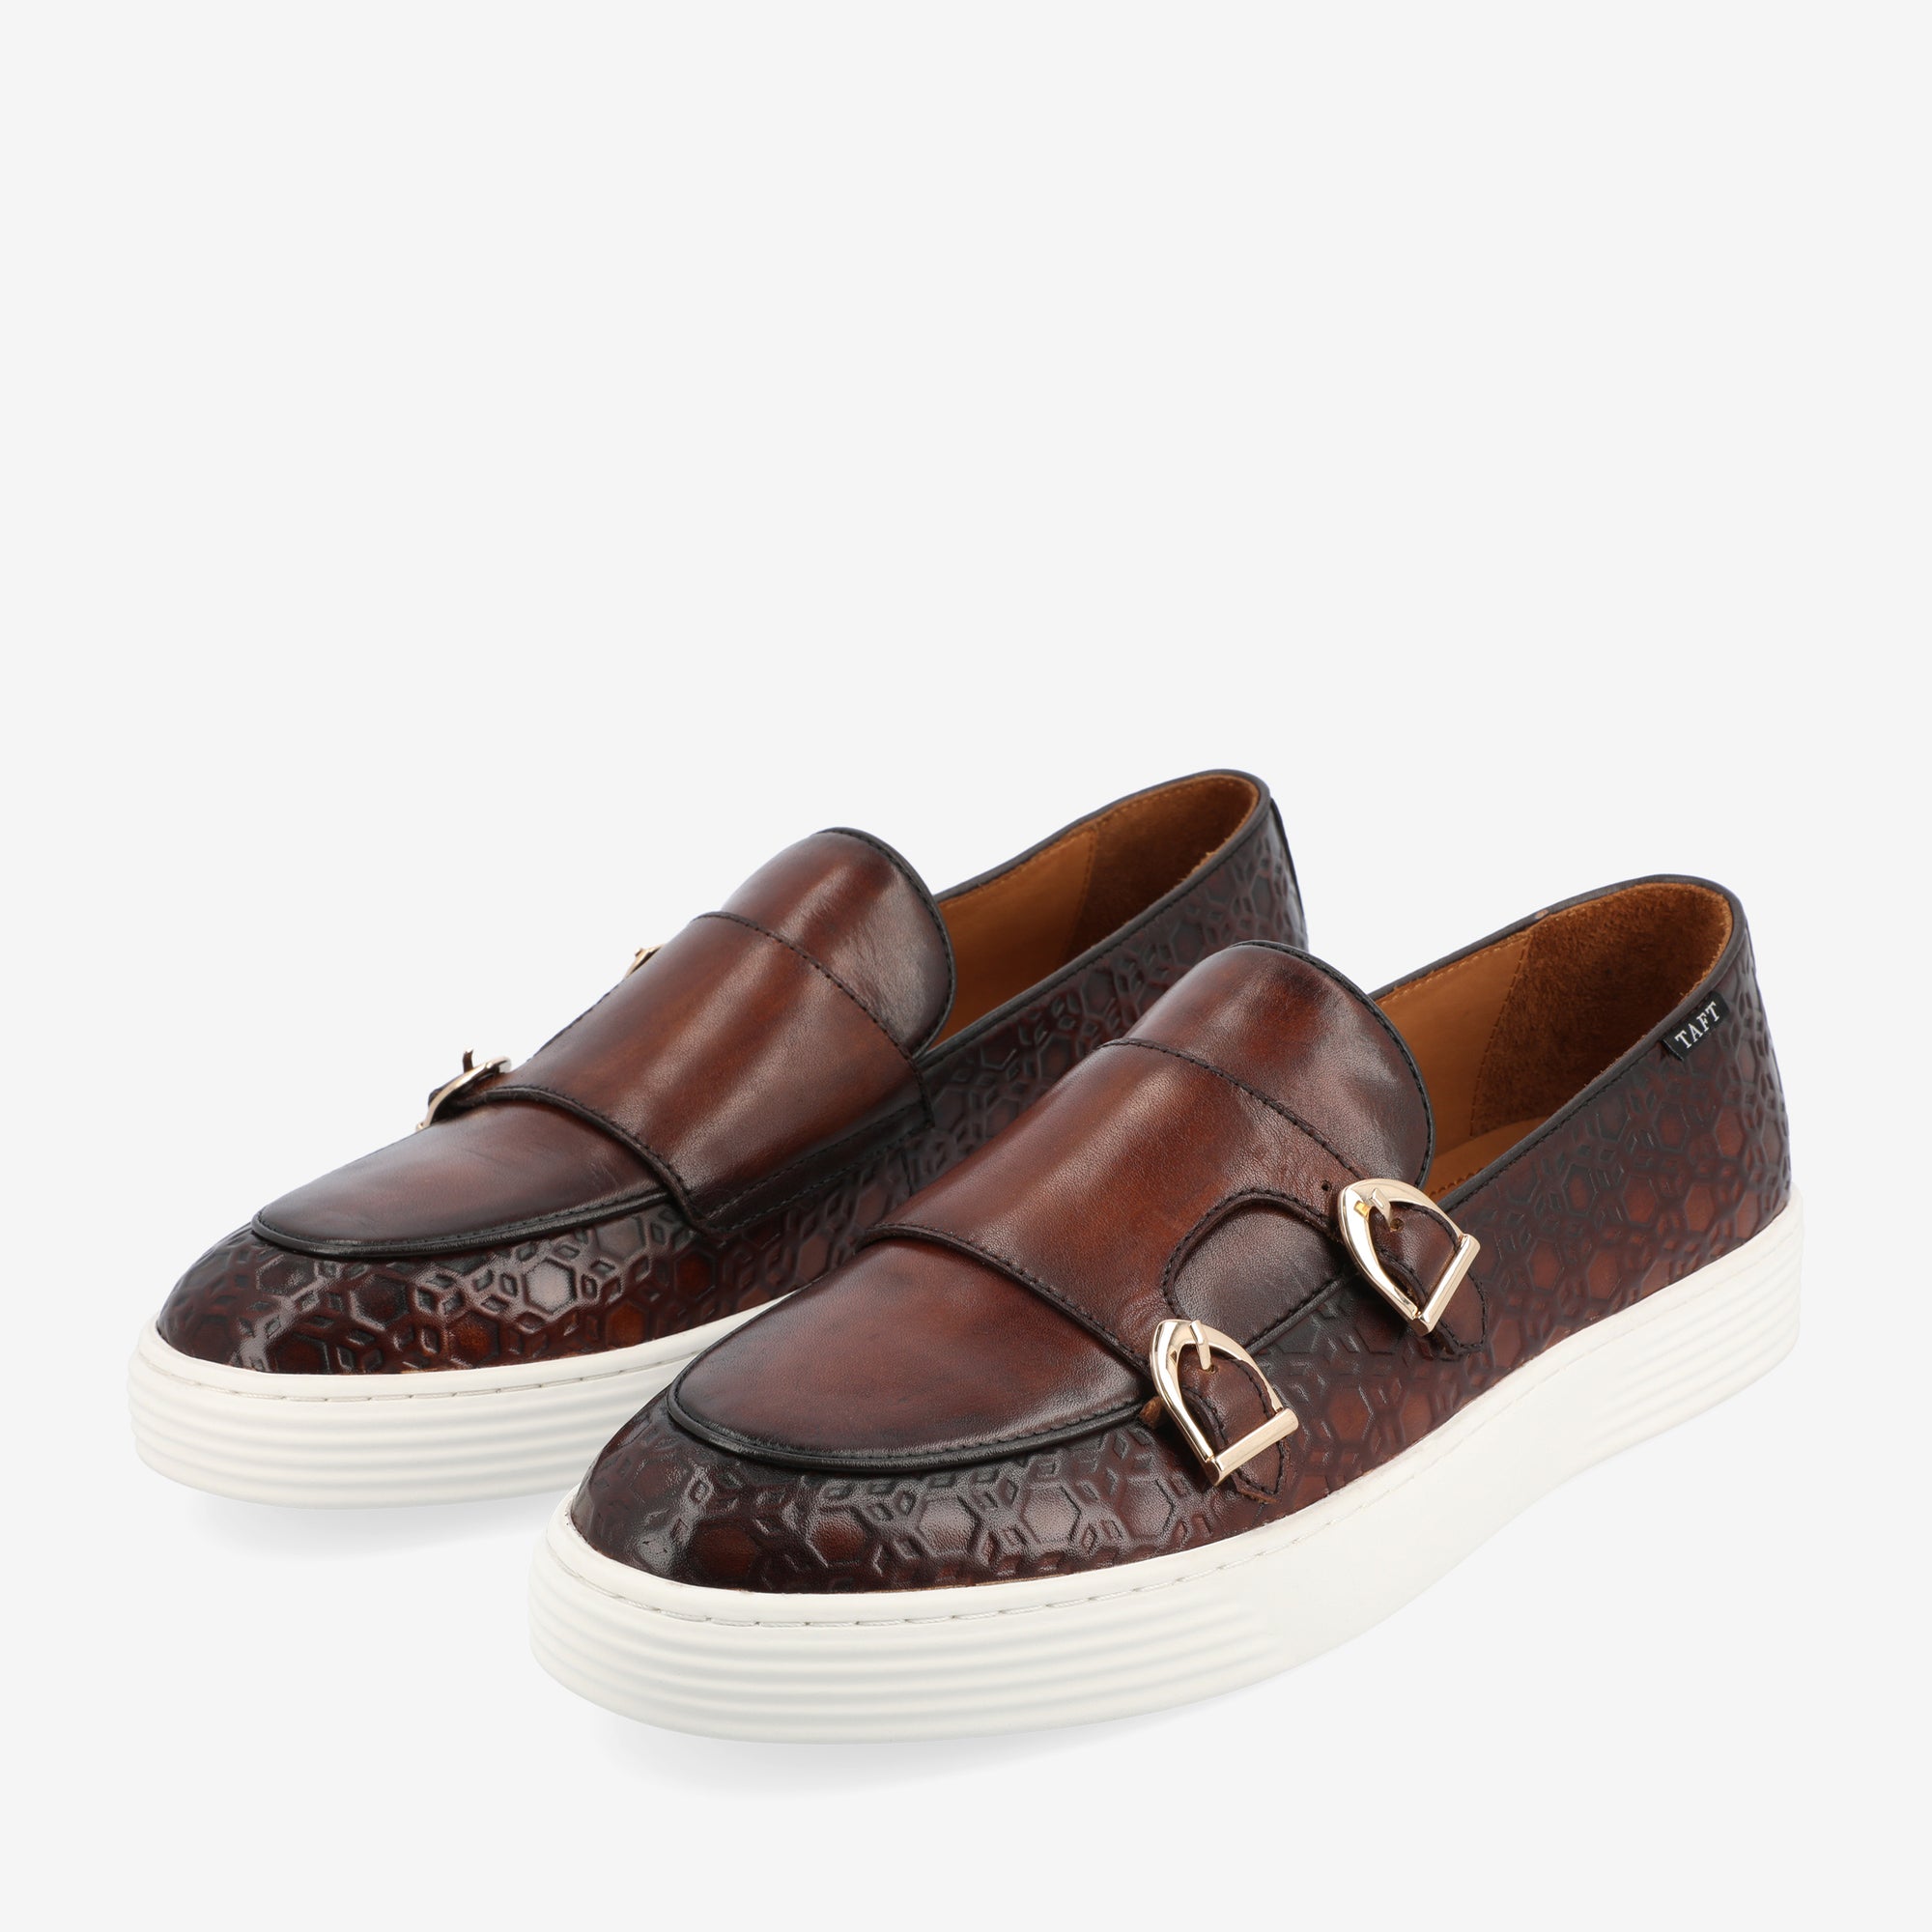 Model 107 Loafer In Chocolate (Last Chance, Final Sale)